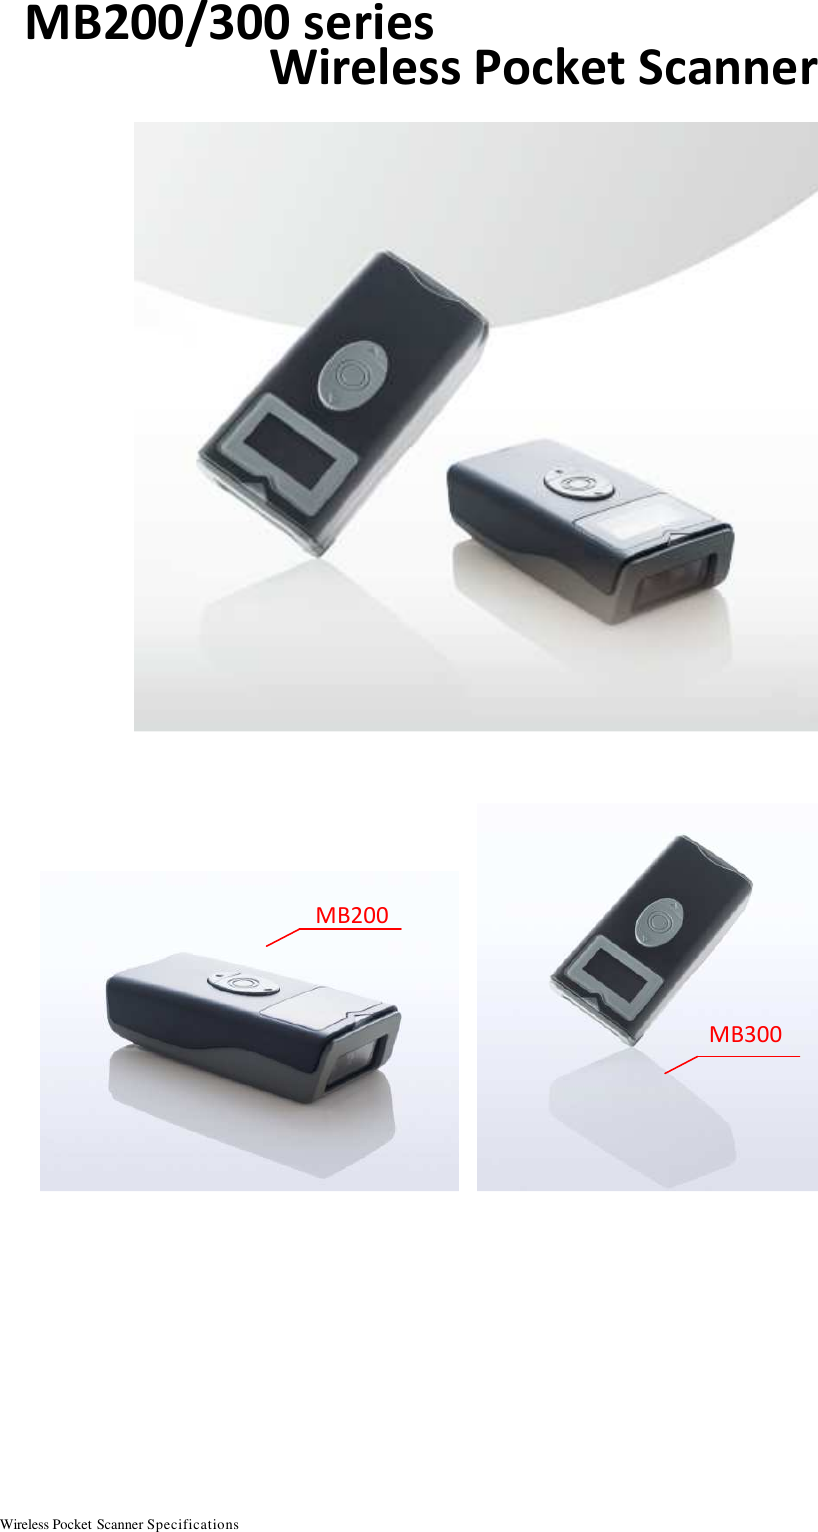 Wireless Pocket Scanner Specifications                                                       MB200/300 series Wireless Pocket Scanner                  MB300 MB200 